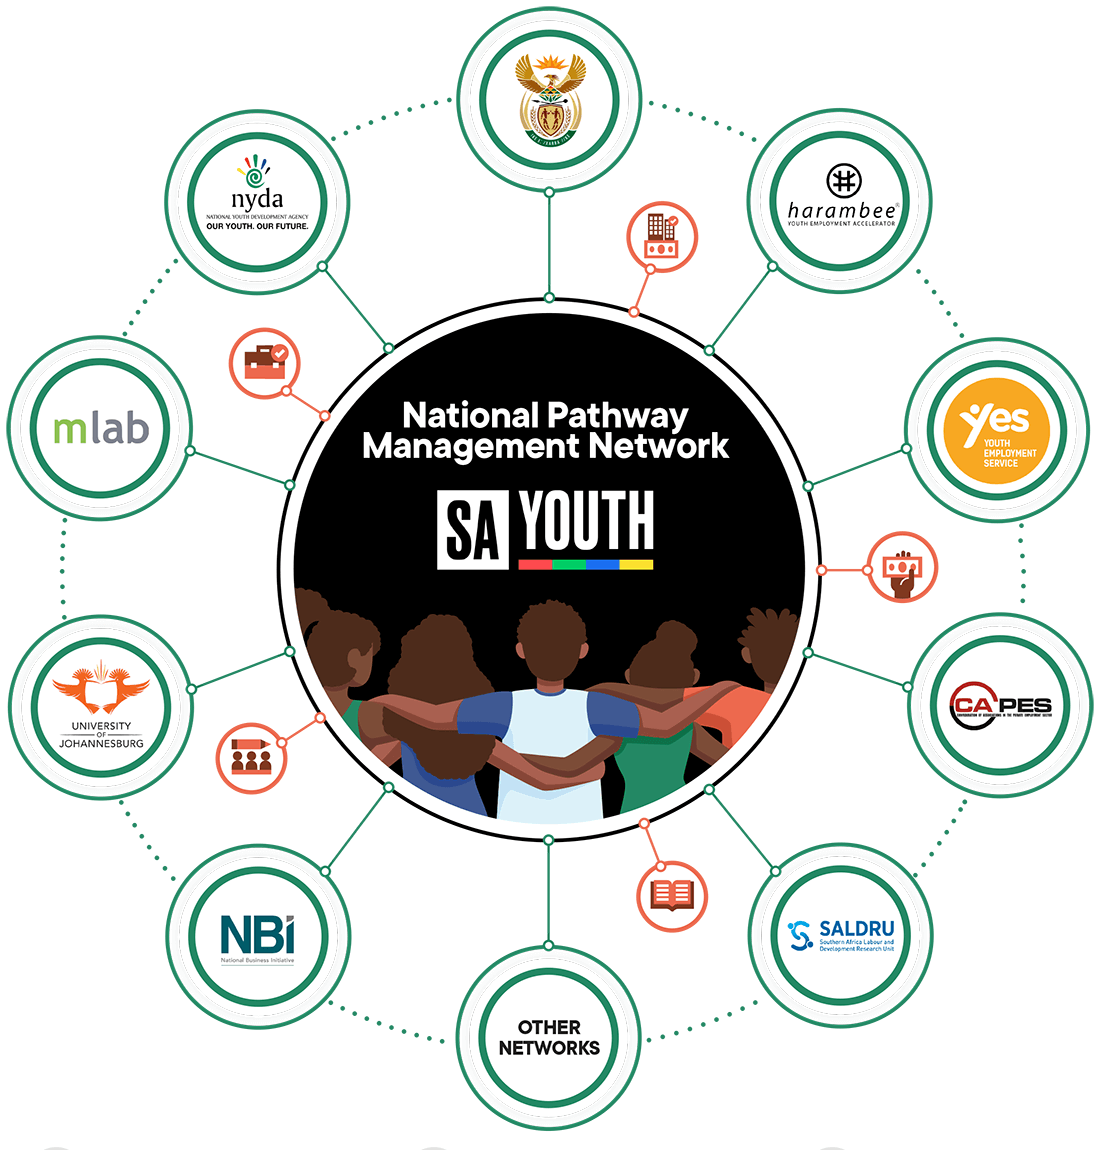 National Pathway Management Network - SA Youth 